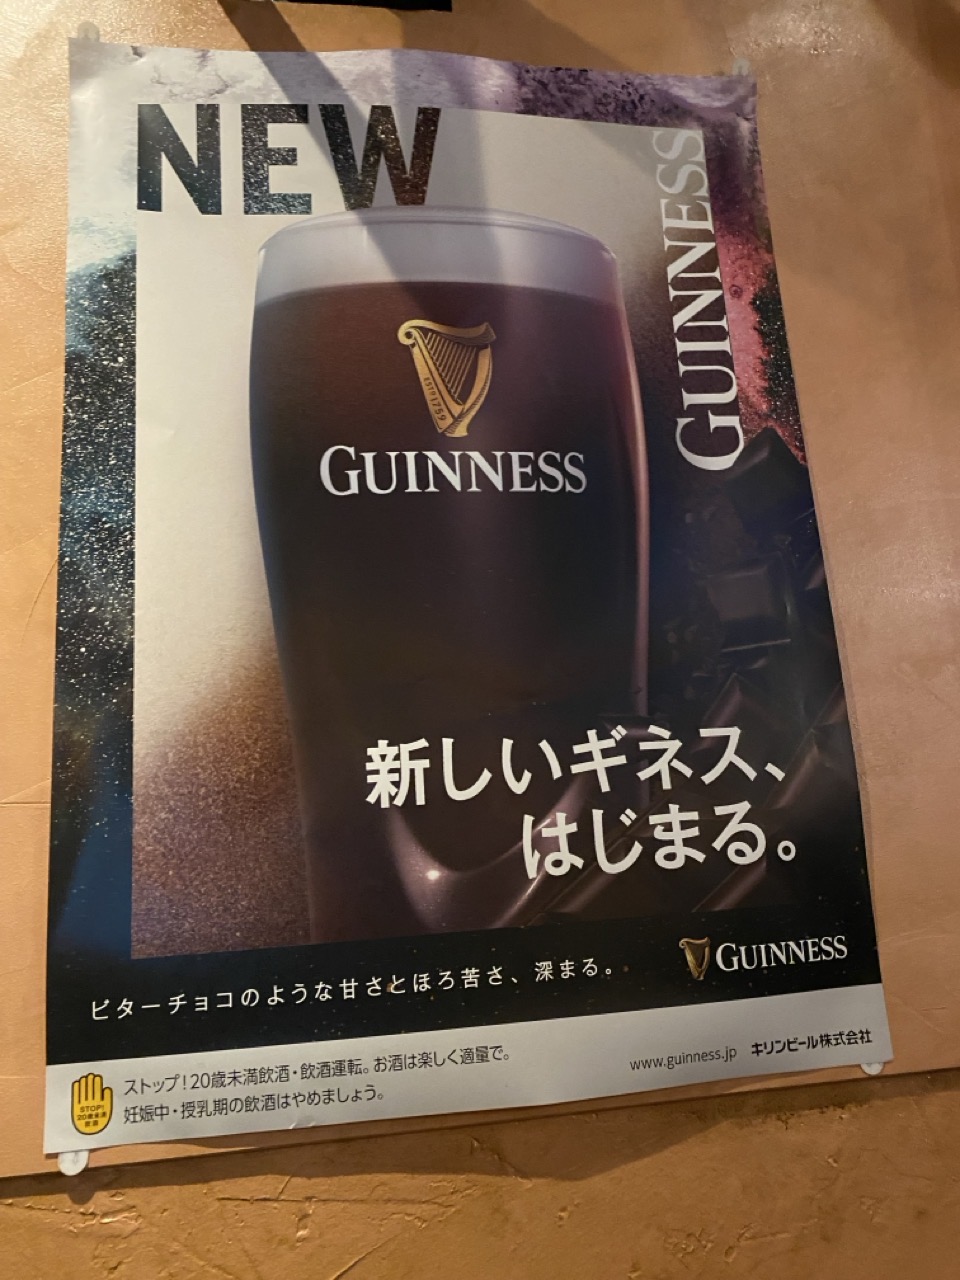 A poster for Guinness in Japan.